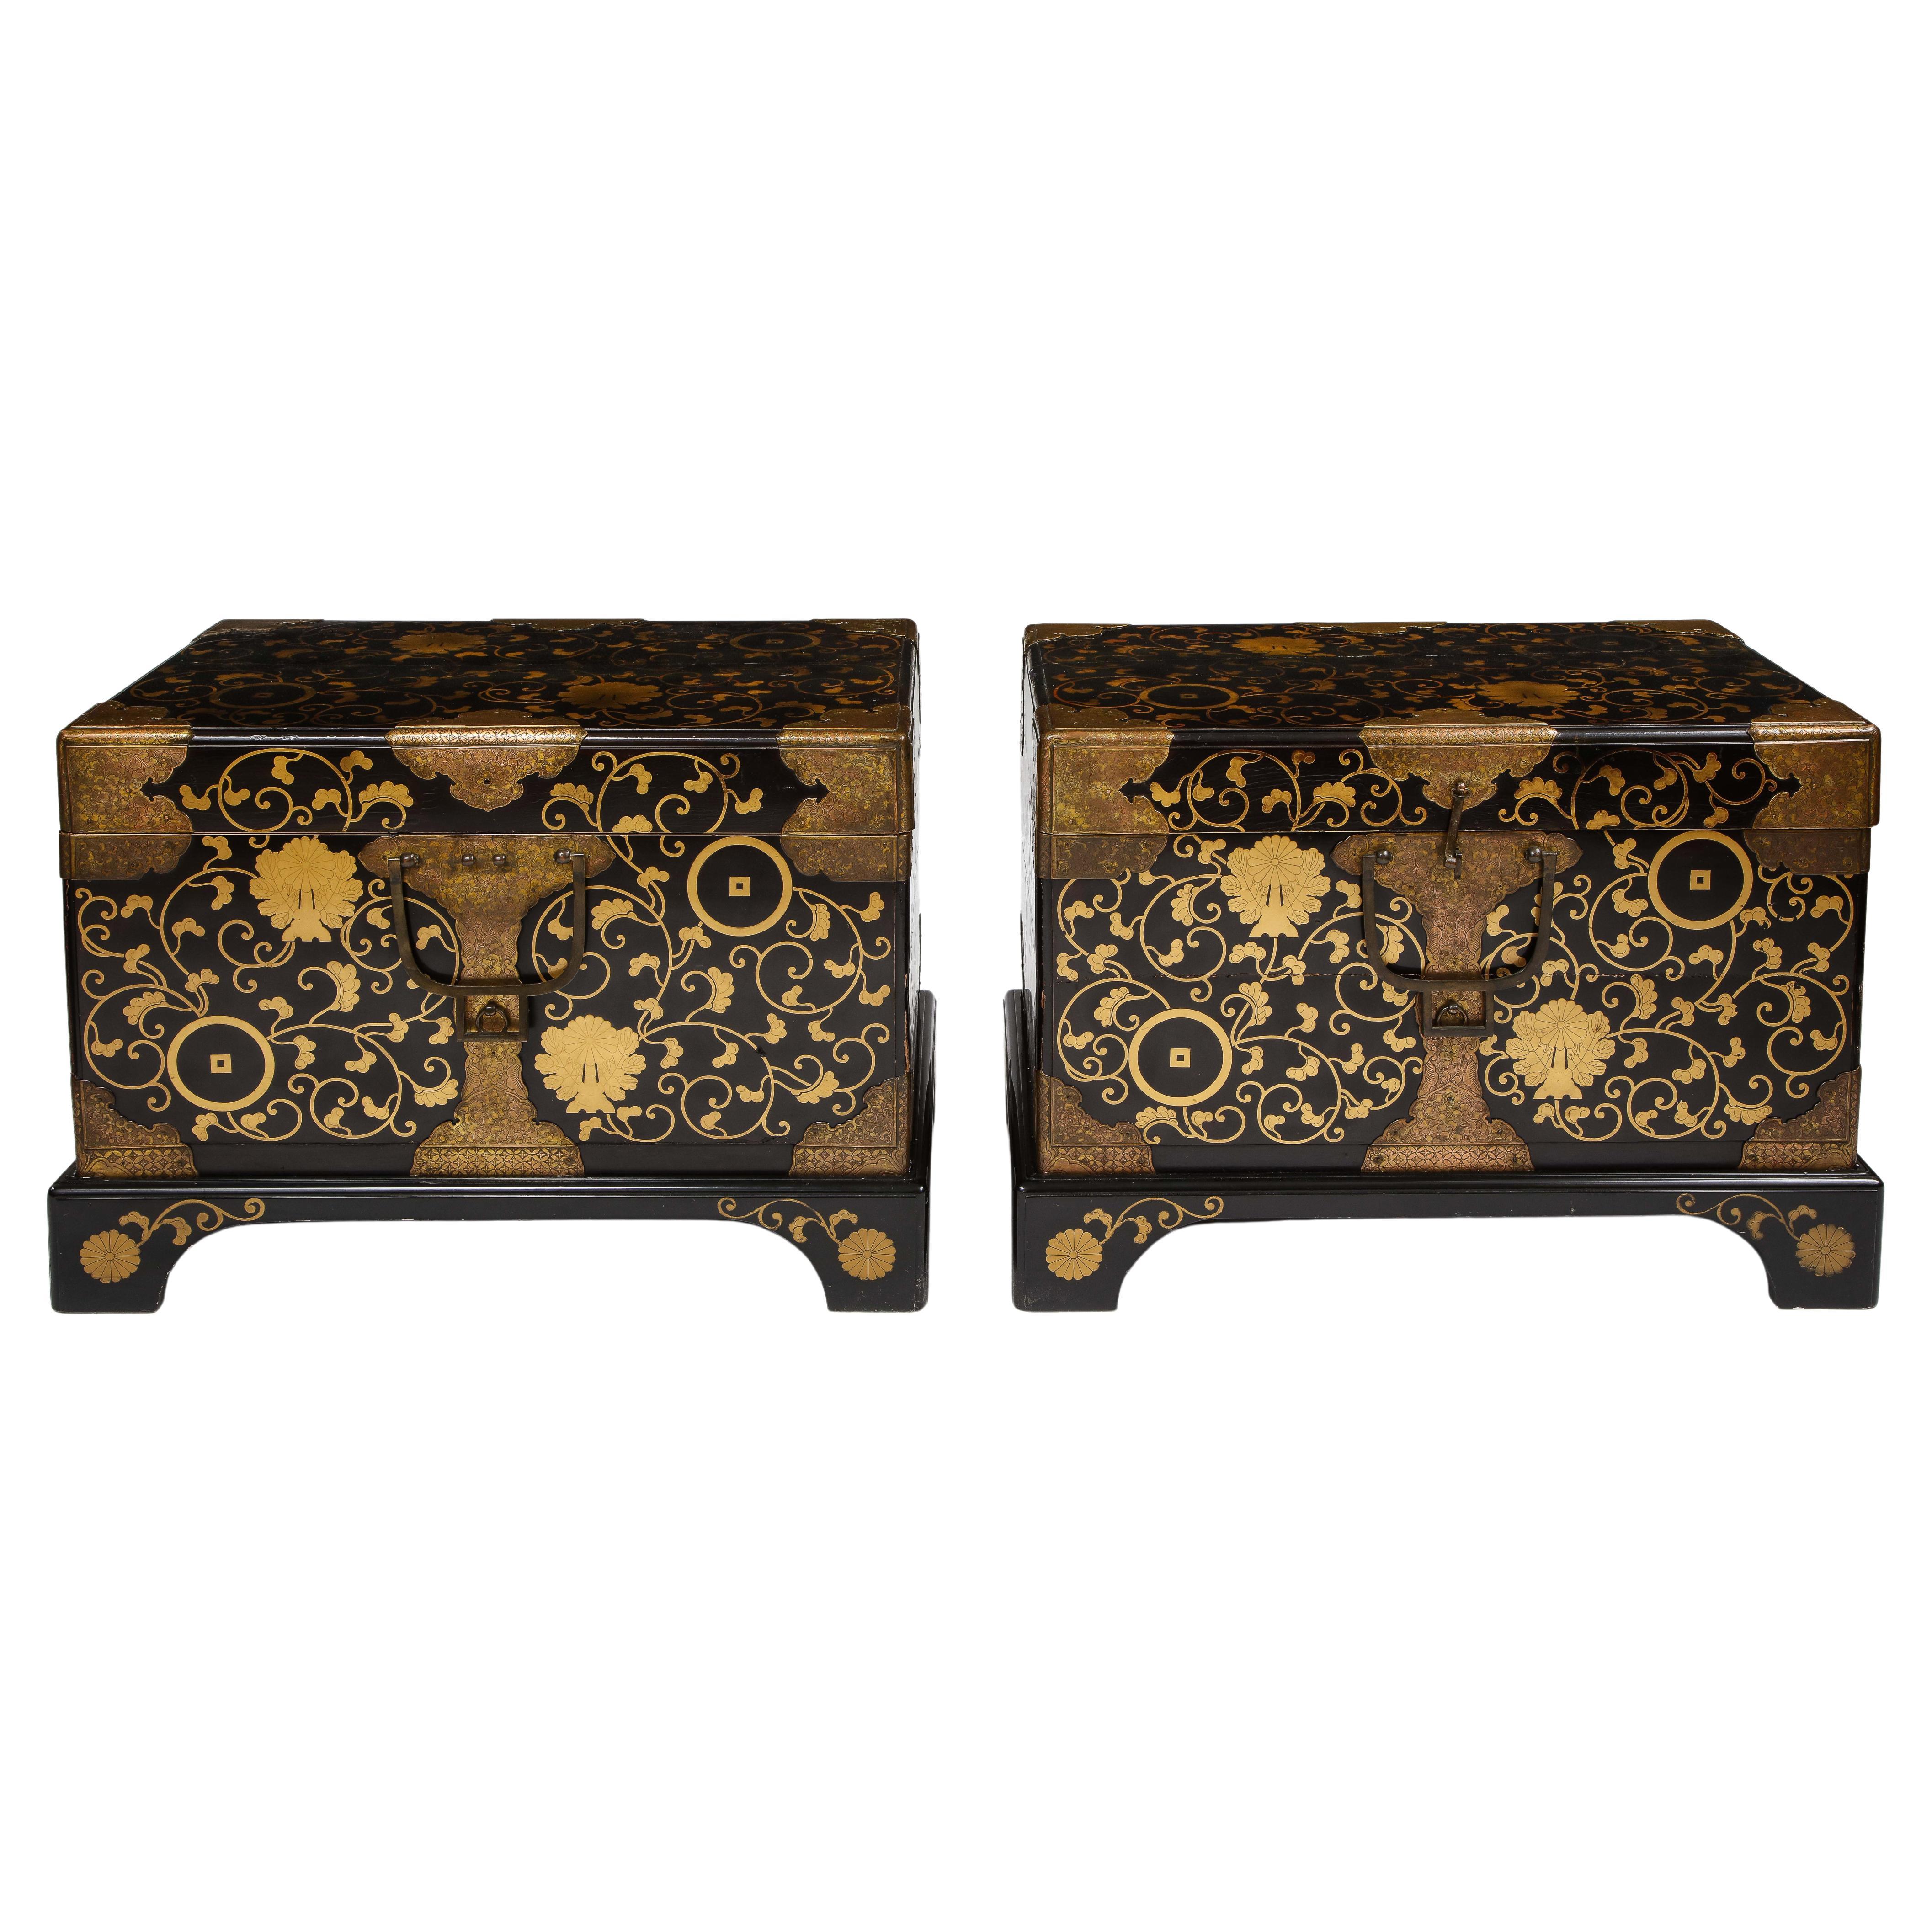  Pair of 19th Century Japanese Meiji Period Dore Bronze Mounted Lacquered Chests